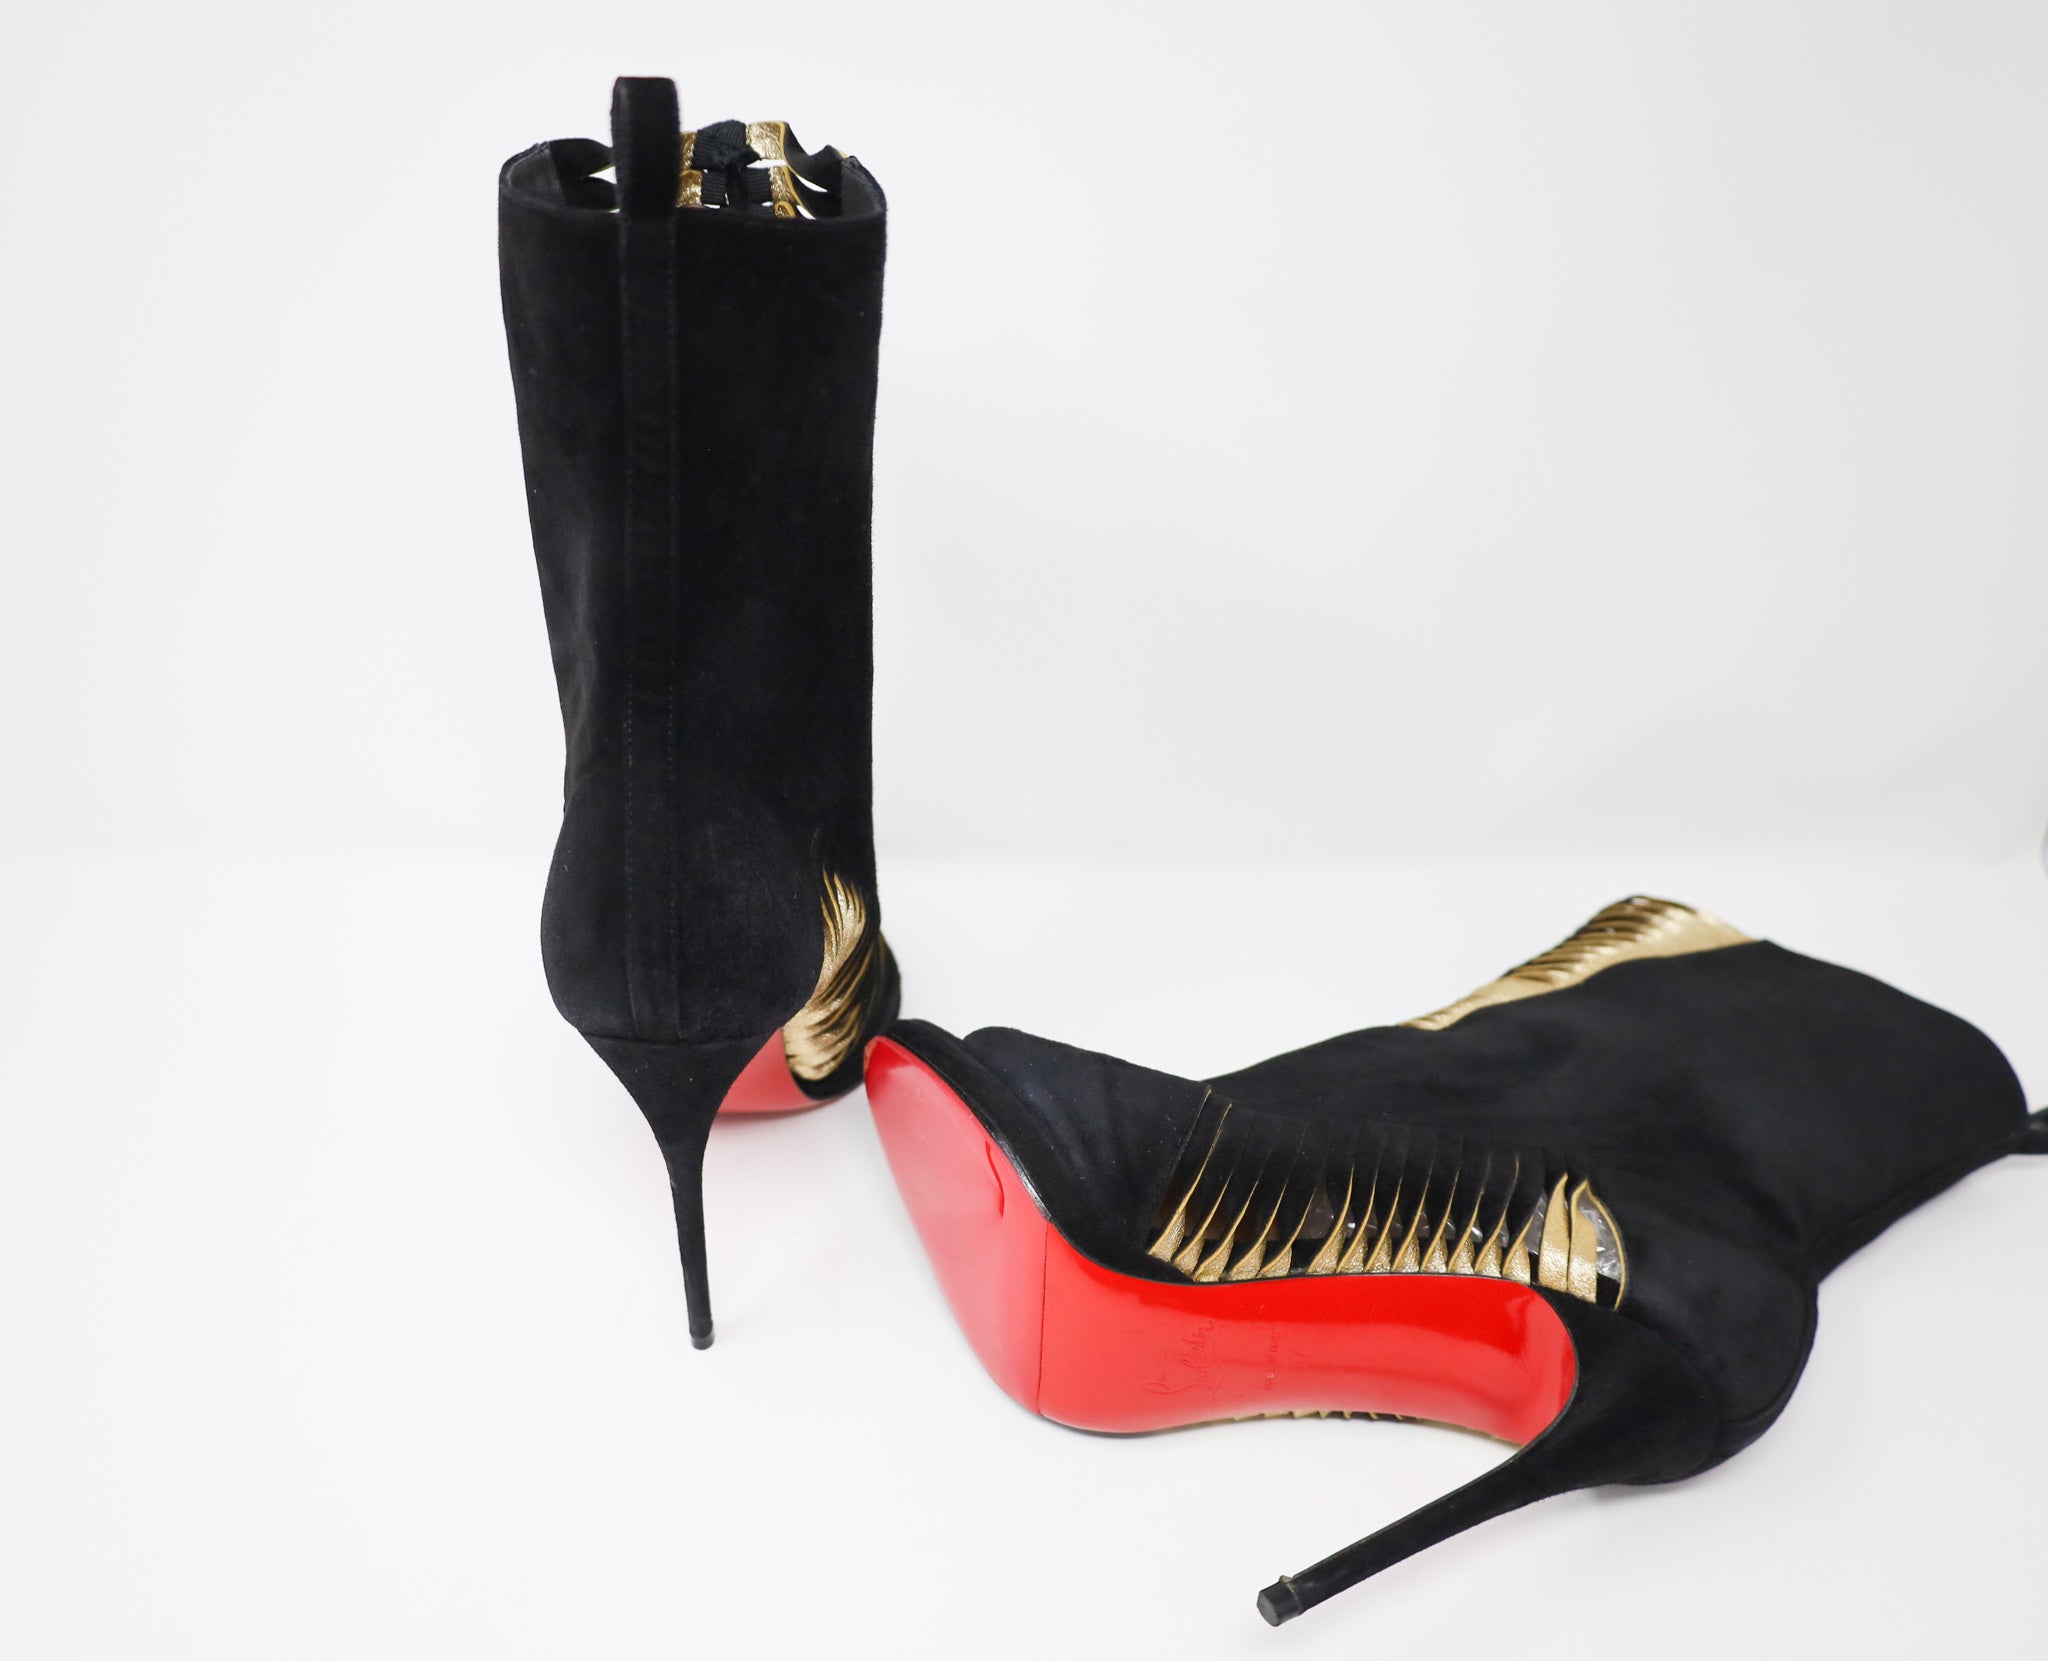 Christian Louboutin Shoes / Footwear − Sale: at $350.00+